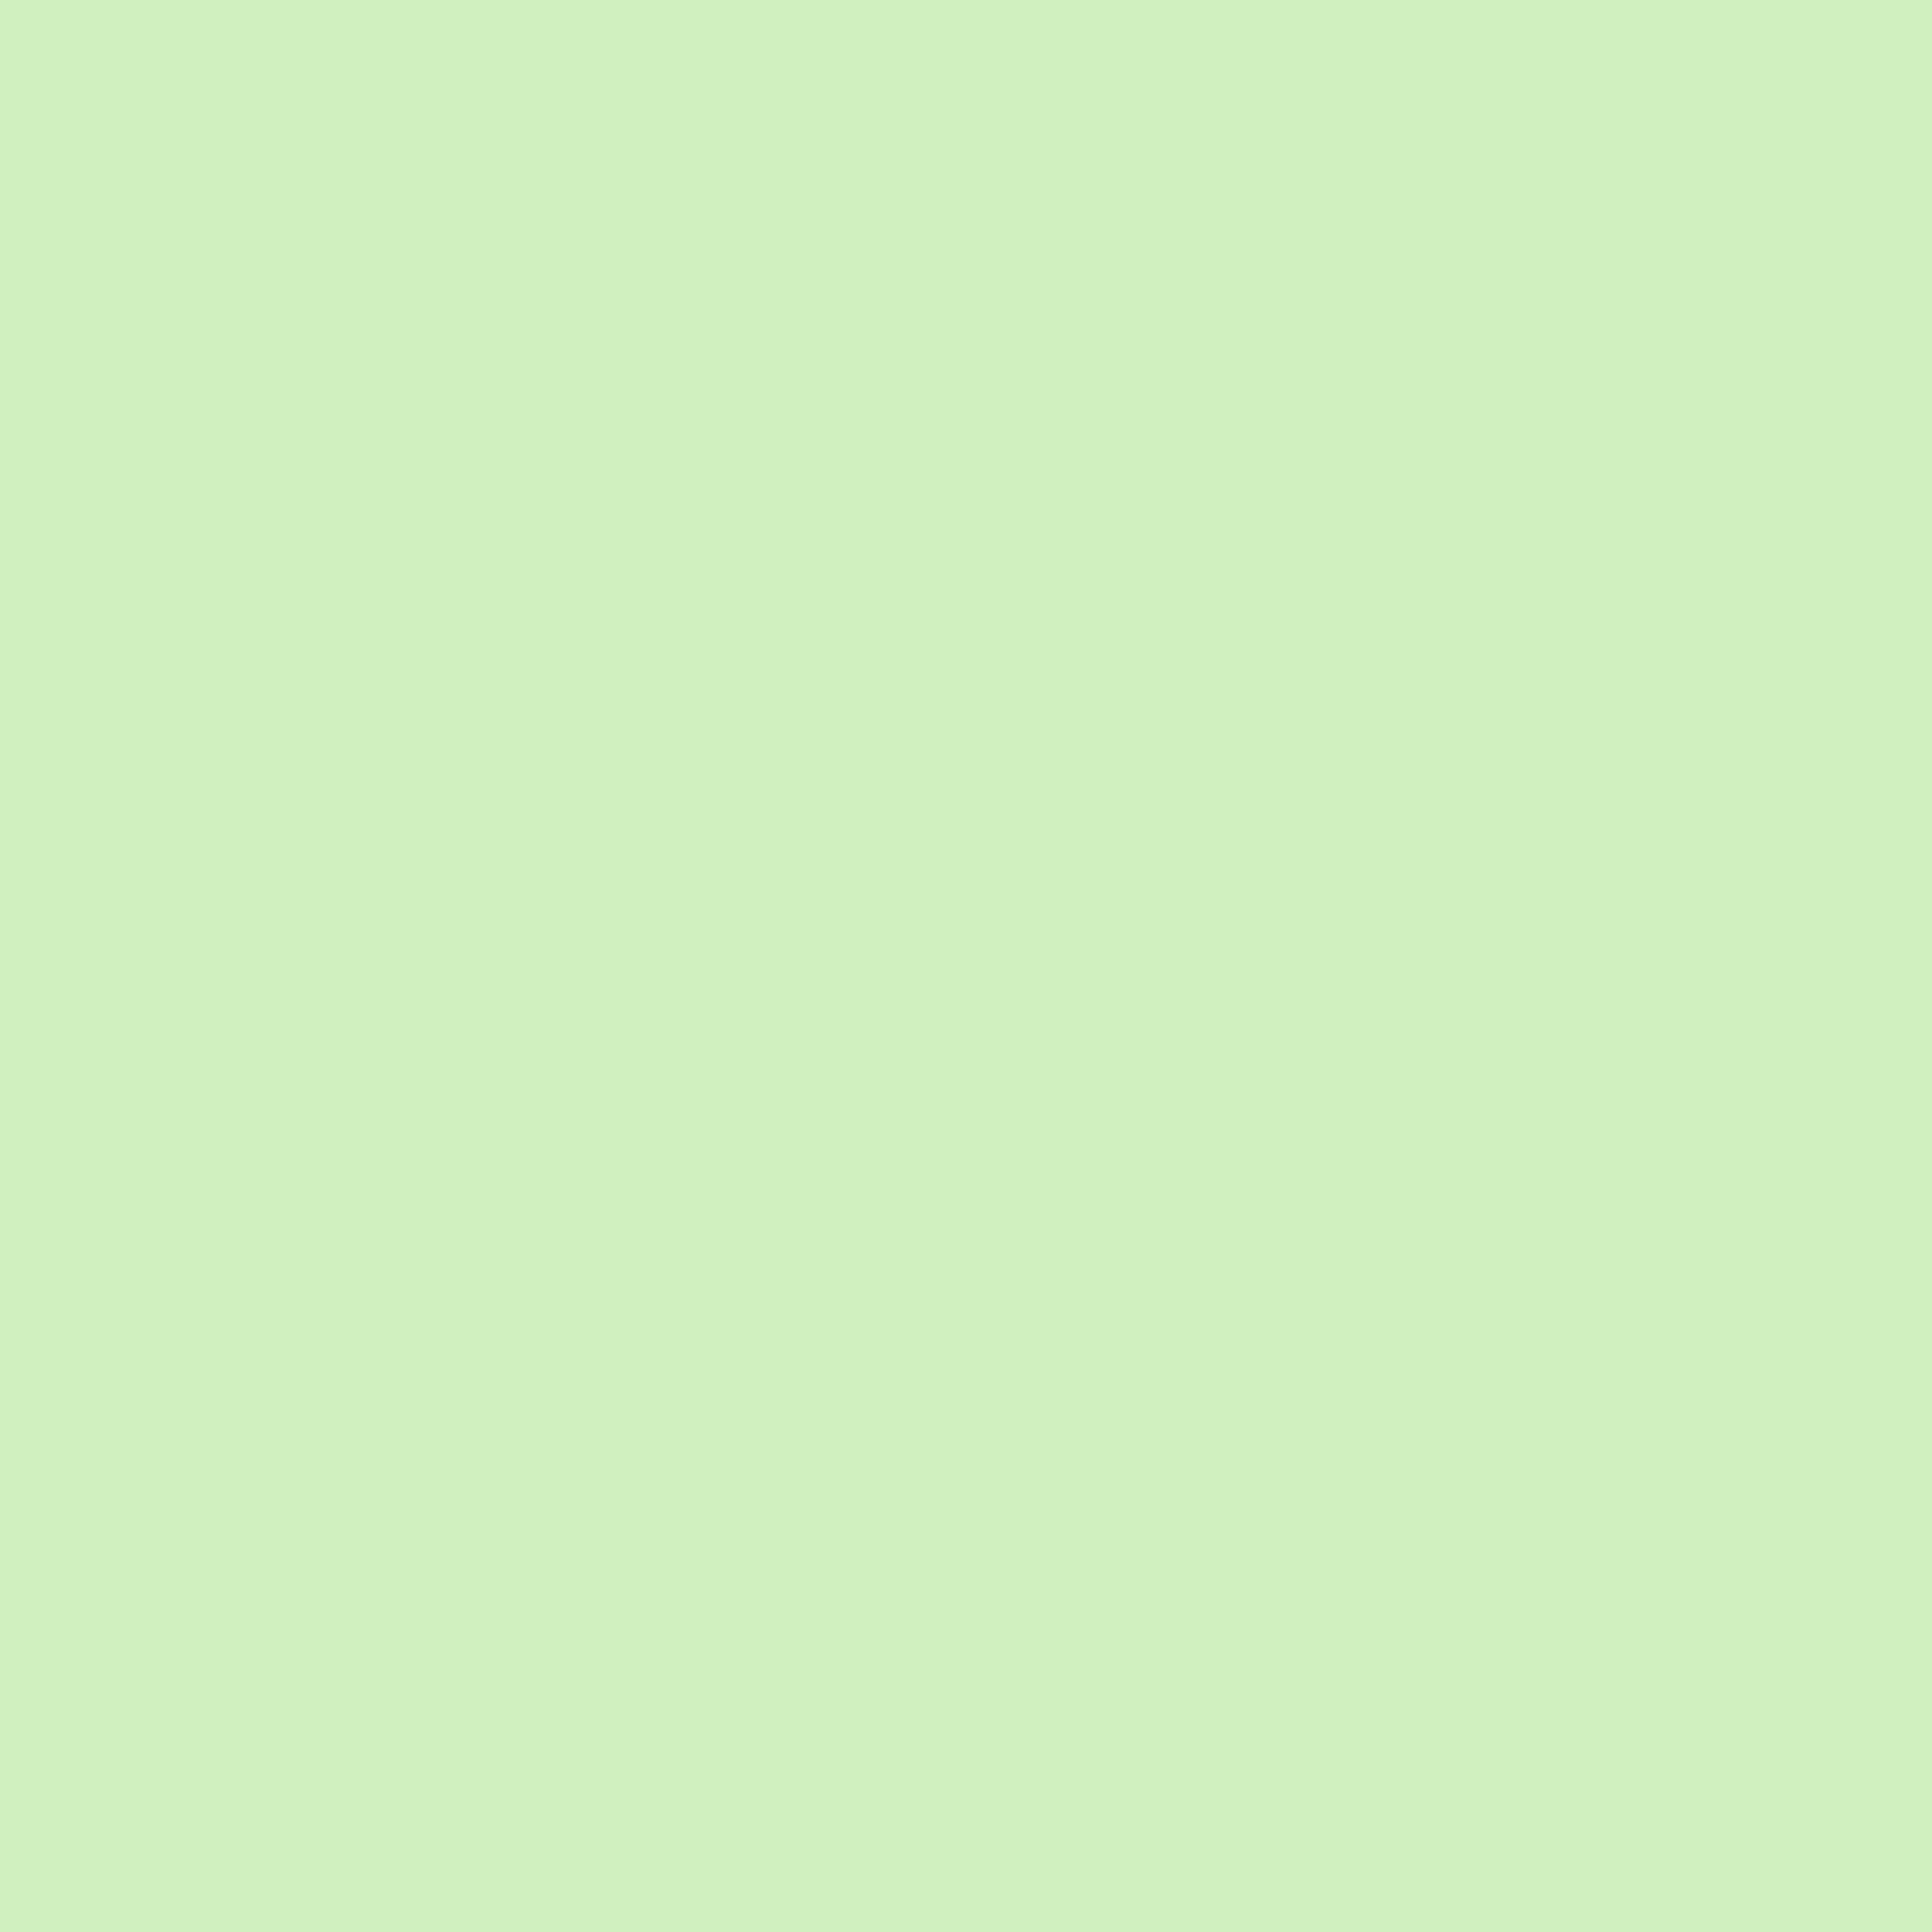 2732x2732 Tea Green Solid Color Background